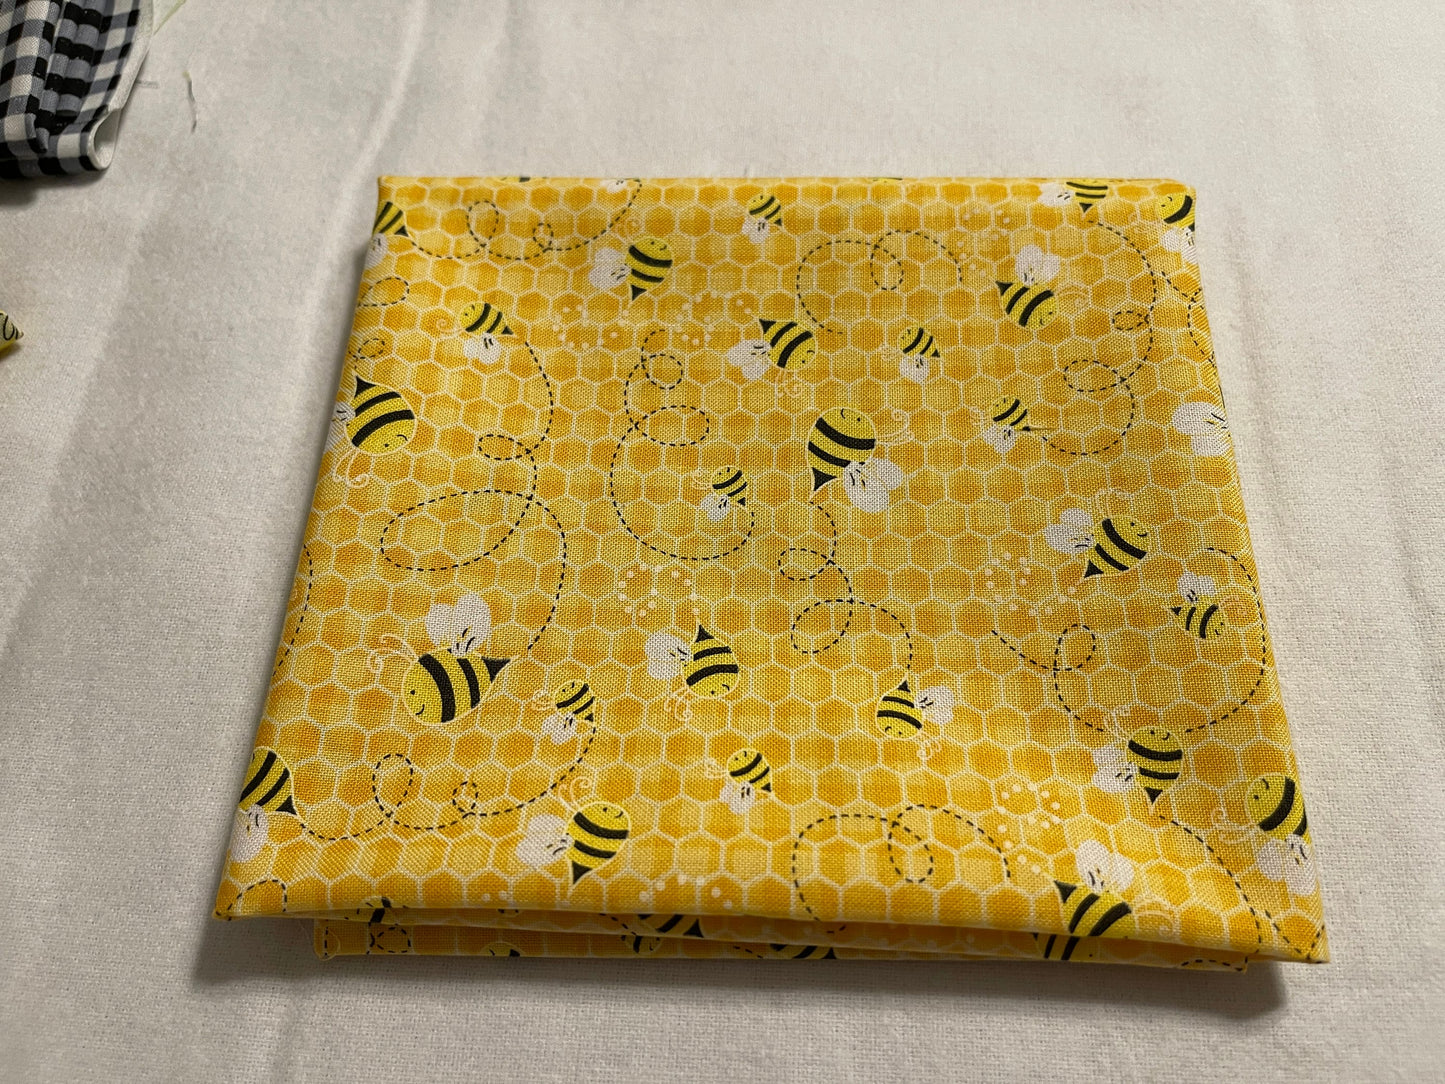 You are my Sunshine Fabric Fat Quarter Bundle, BeeLoved Fabric, Sunflower Panel & 8 FQs, Gail Cadden, Honeybee Fabric, Sunflower fabric